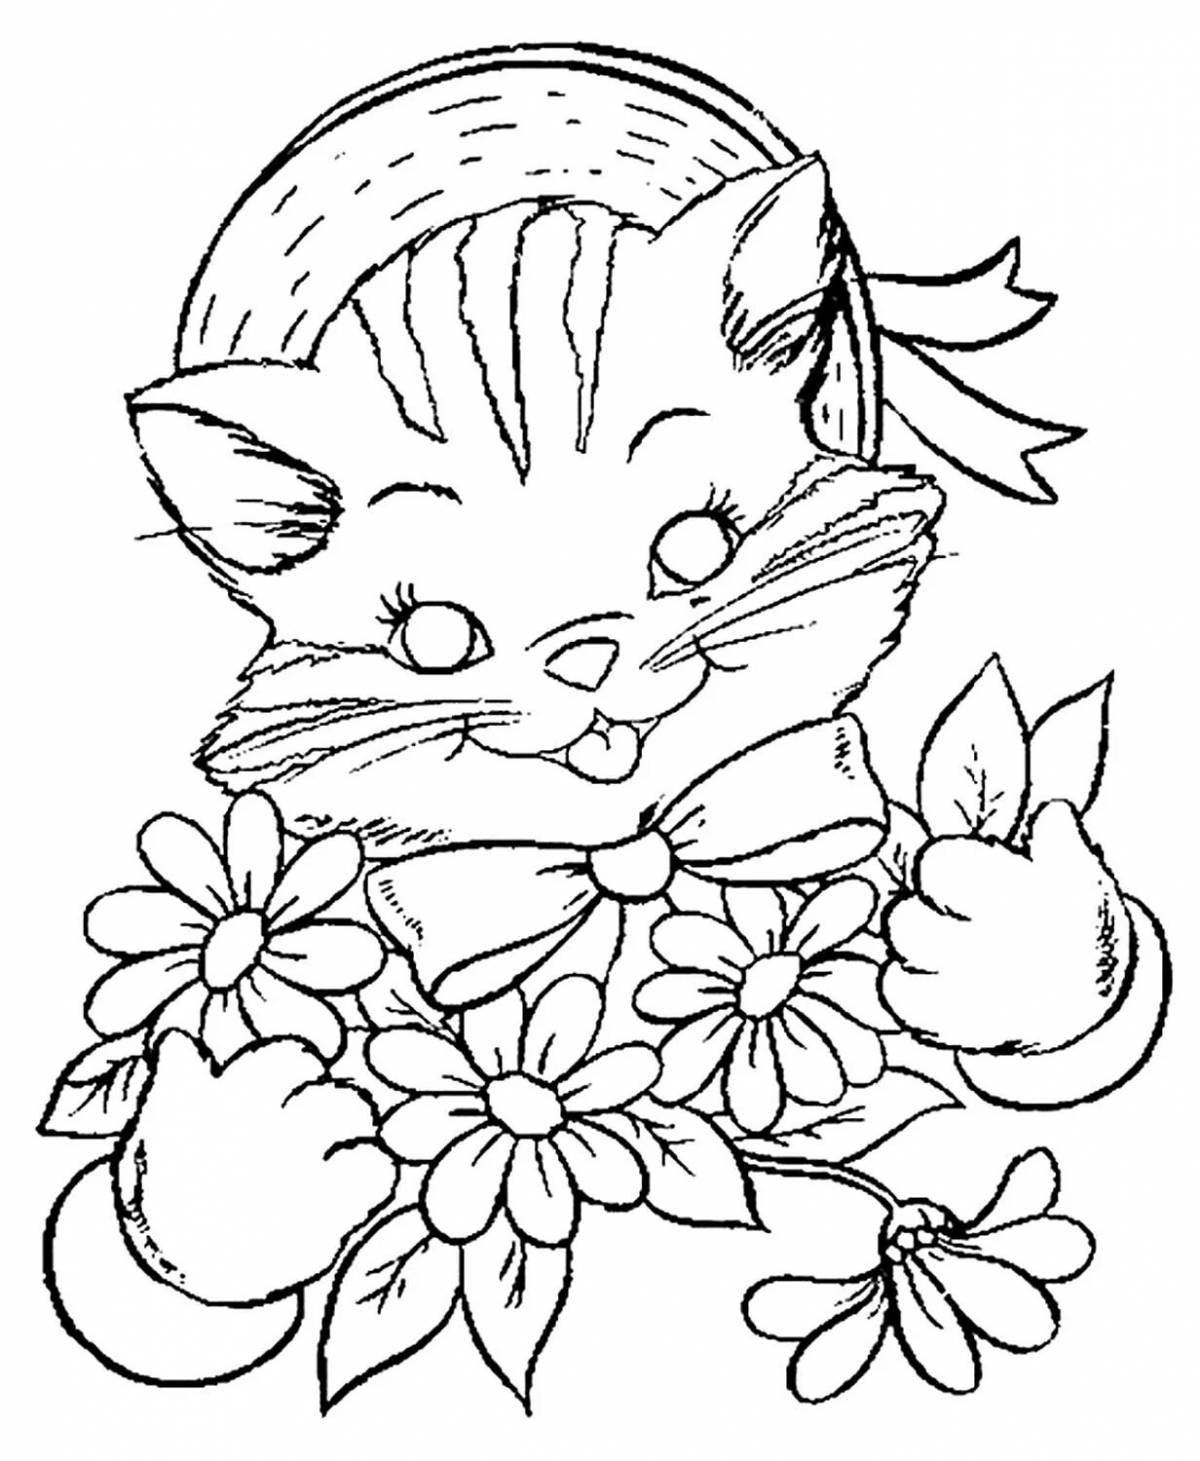 Radiant kitty coloring book for kids 6-7 years old